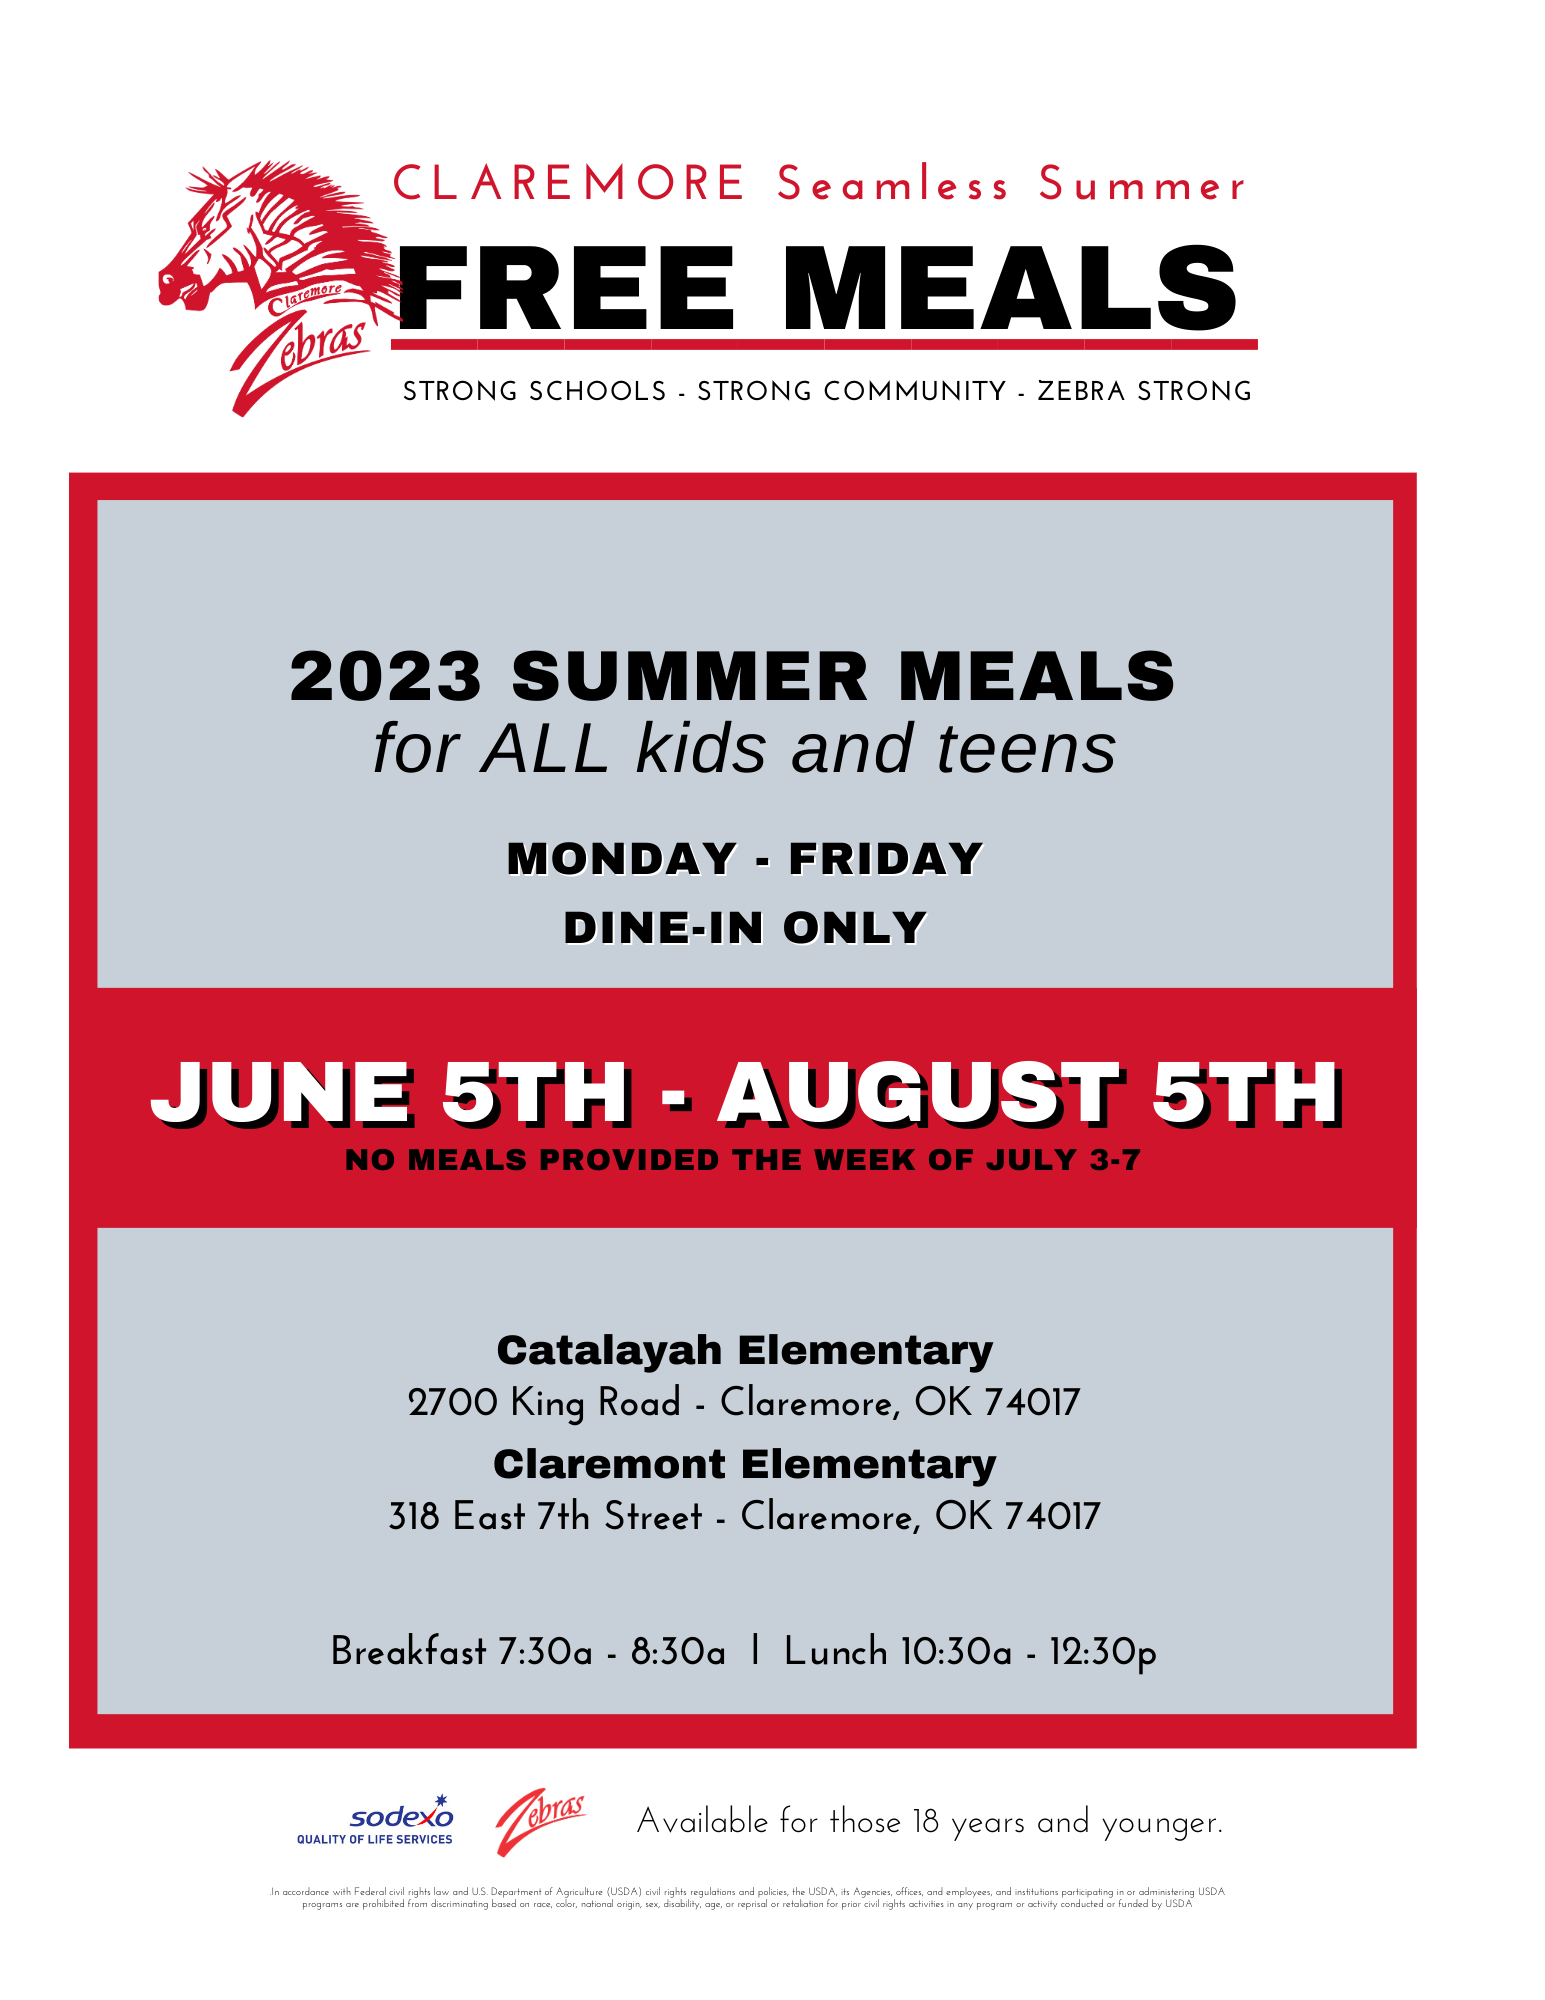 Free Summer Meals - information in right column